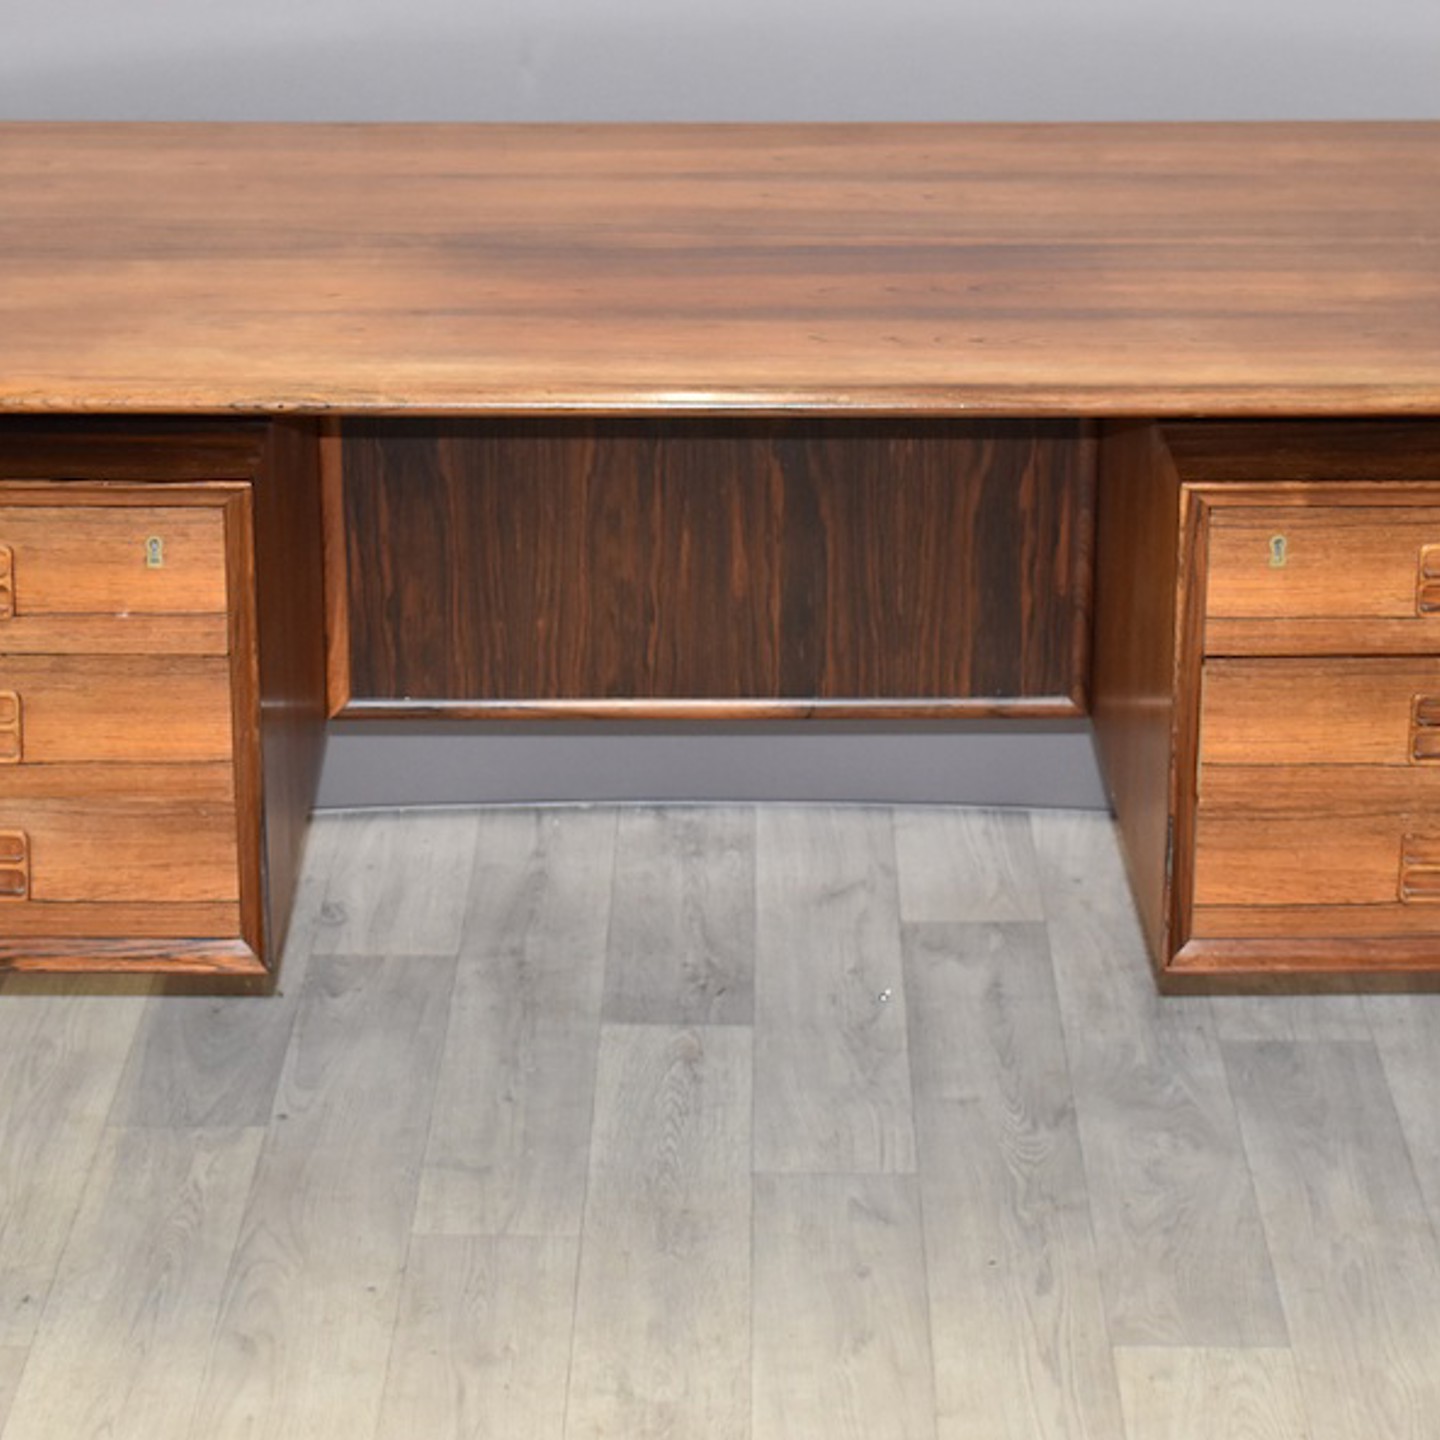 Danish Rosewood Retro Mid Century Modern Twin Pedestal Desk, Designed By Anne Vodder, With Six Drawers And Three Cubby Holes Verso, HAMMER Ś1,200